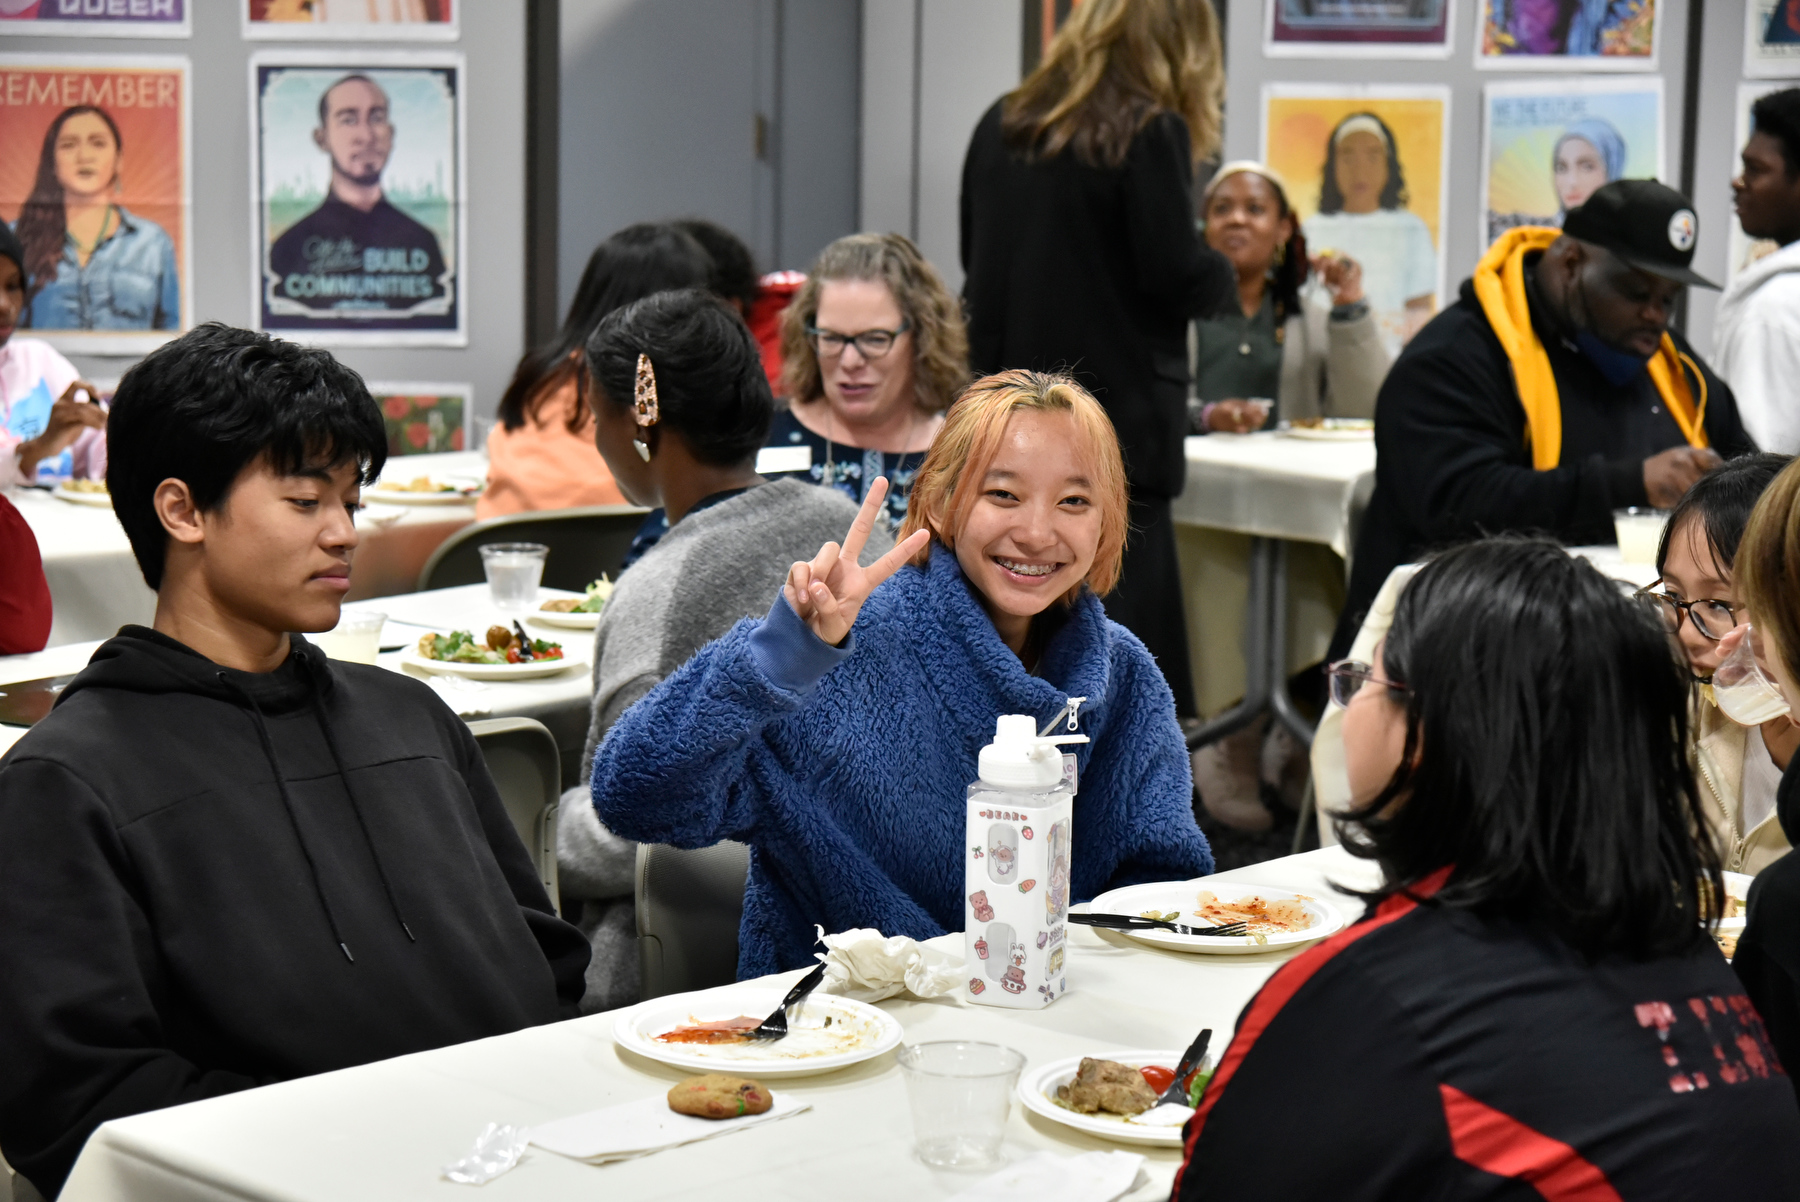 Students from Syracuse visited campus on Oct. 27 and enjoyed a lunch hosted by the James A. Triandiflou '88 Institute for Equity, Diversity, Inclusion and Transformative Practice. 